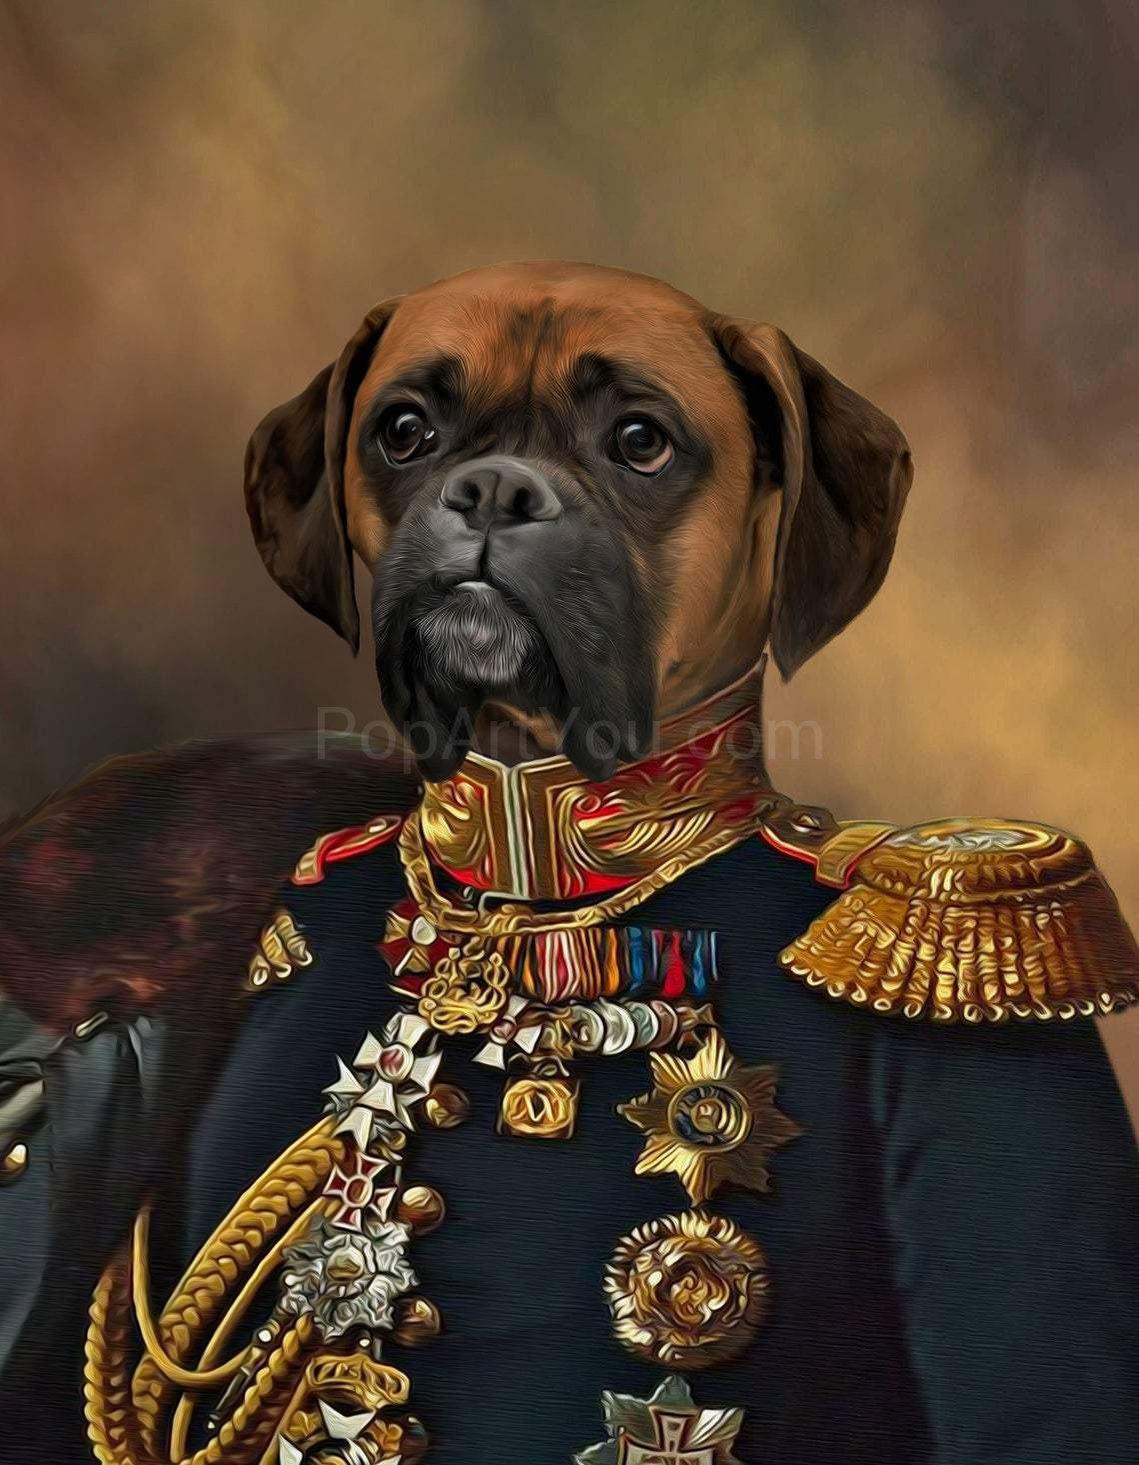 The portrait of male dog with human body in a general's attire in historical style